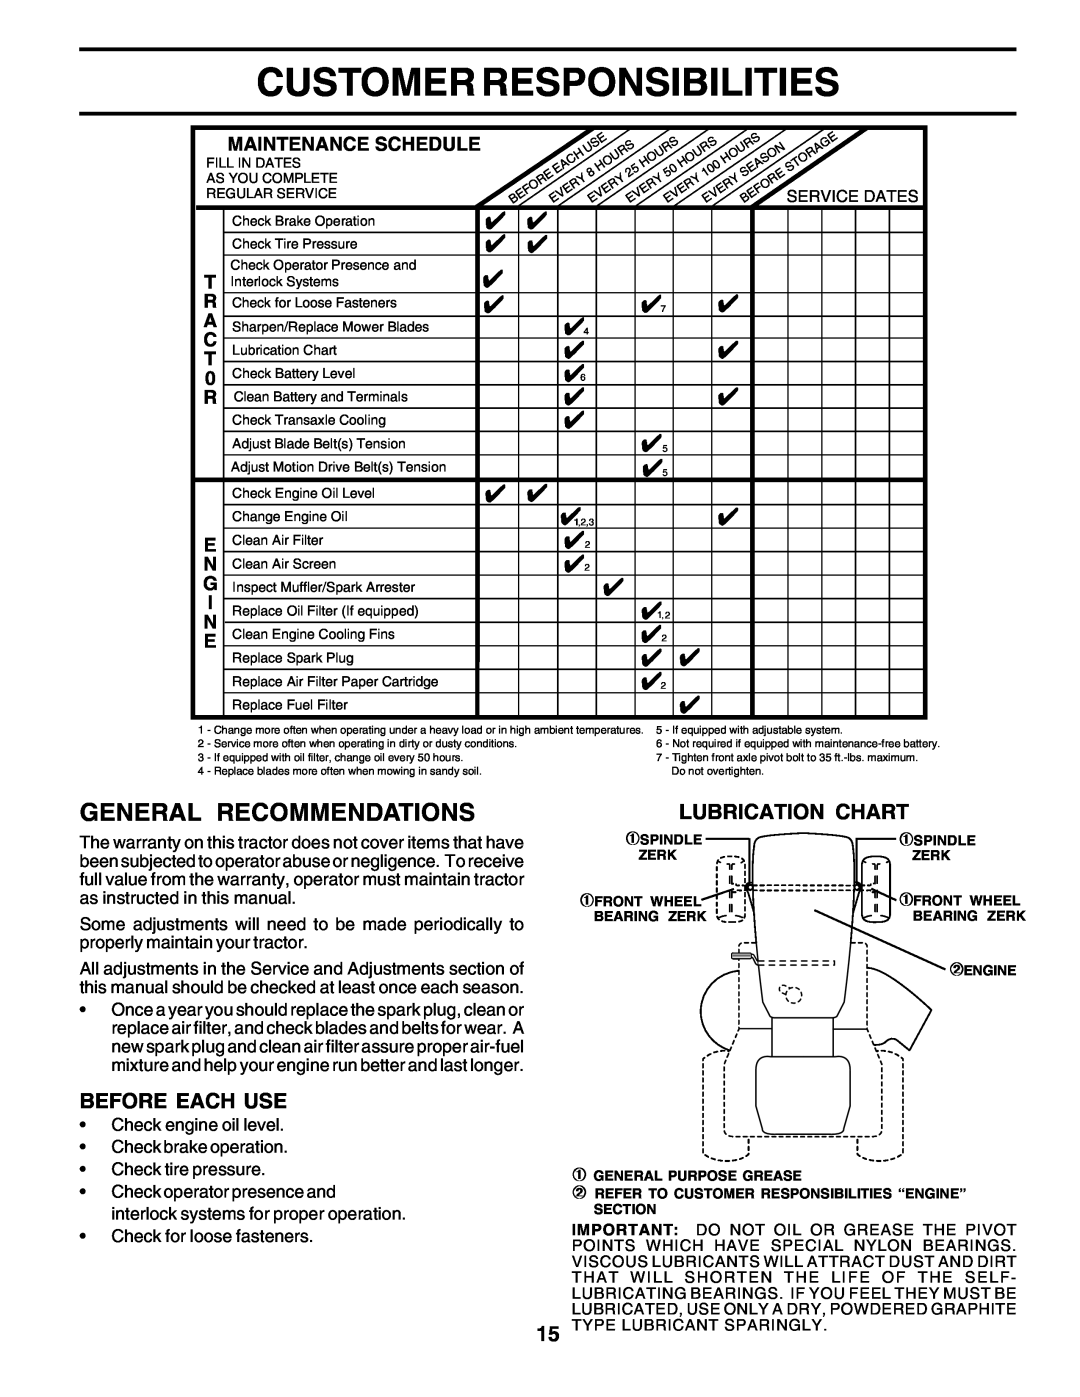 Weed Eater 178704 manual Customer Responsibilities, General Recommendations, Before Each Use, Maintenance Schedule 